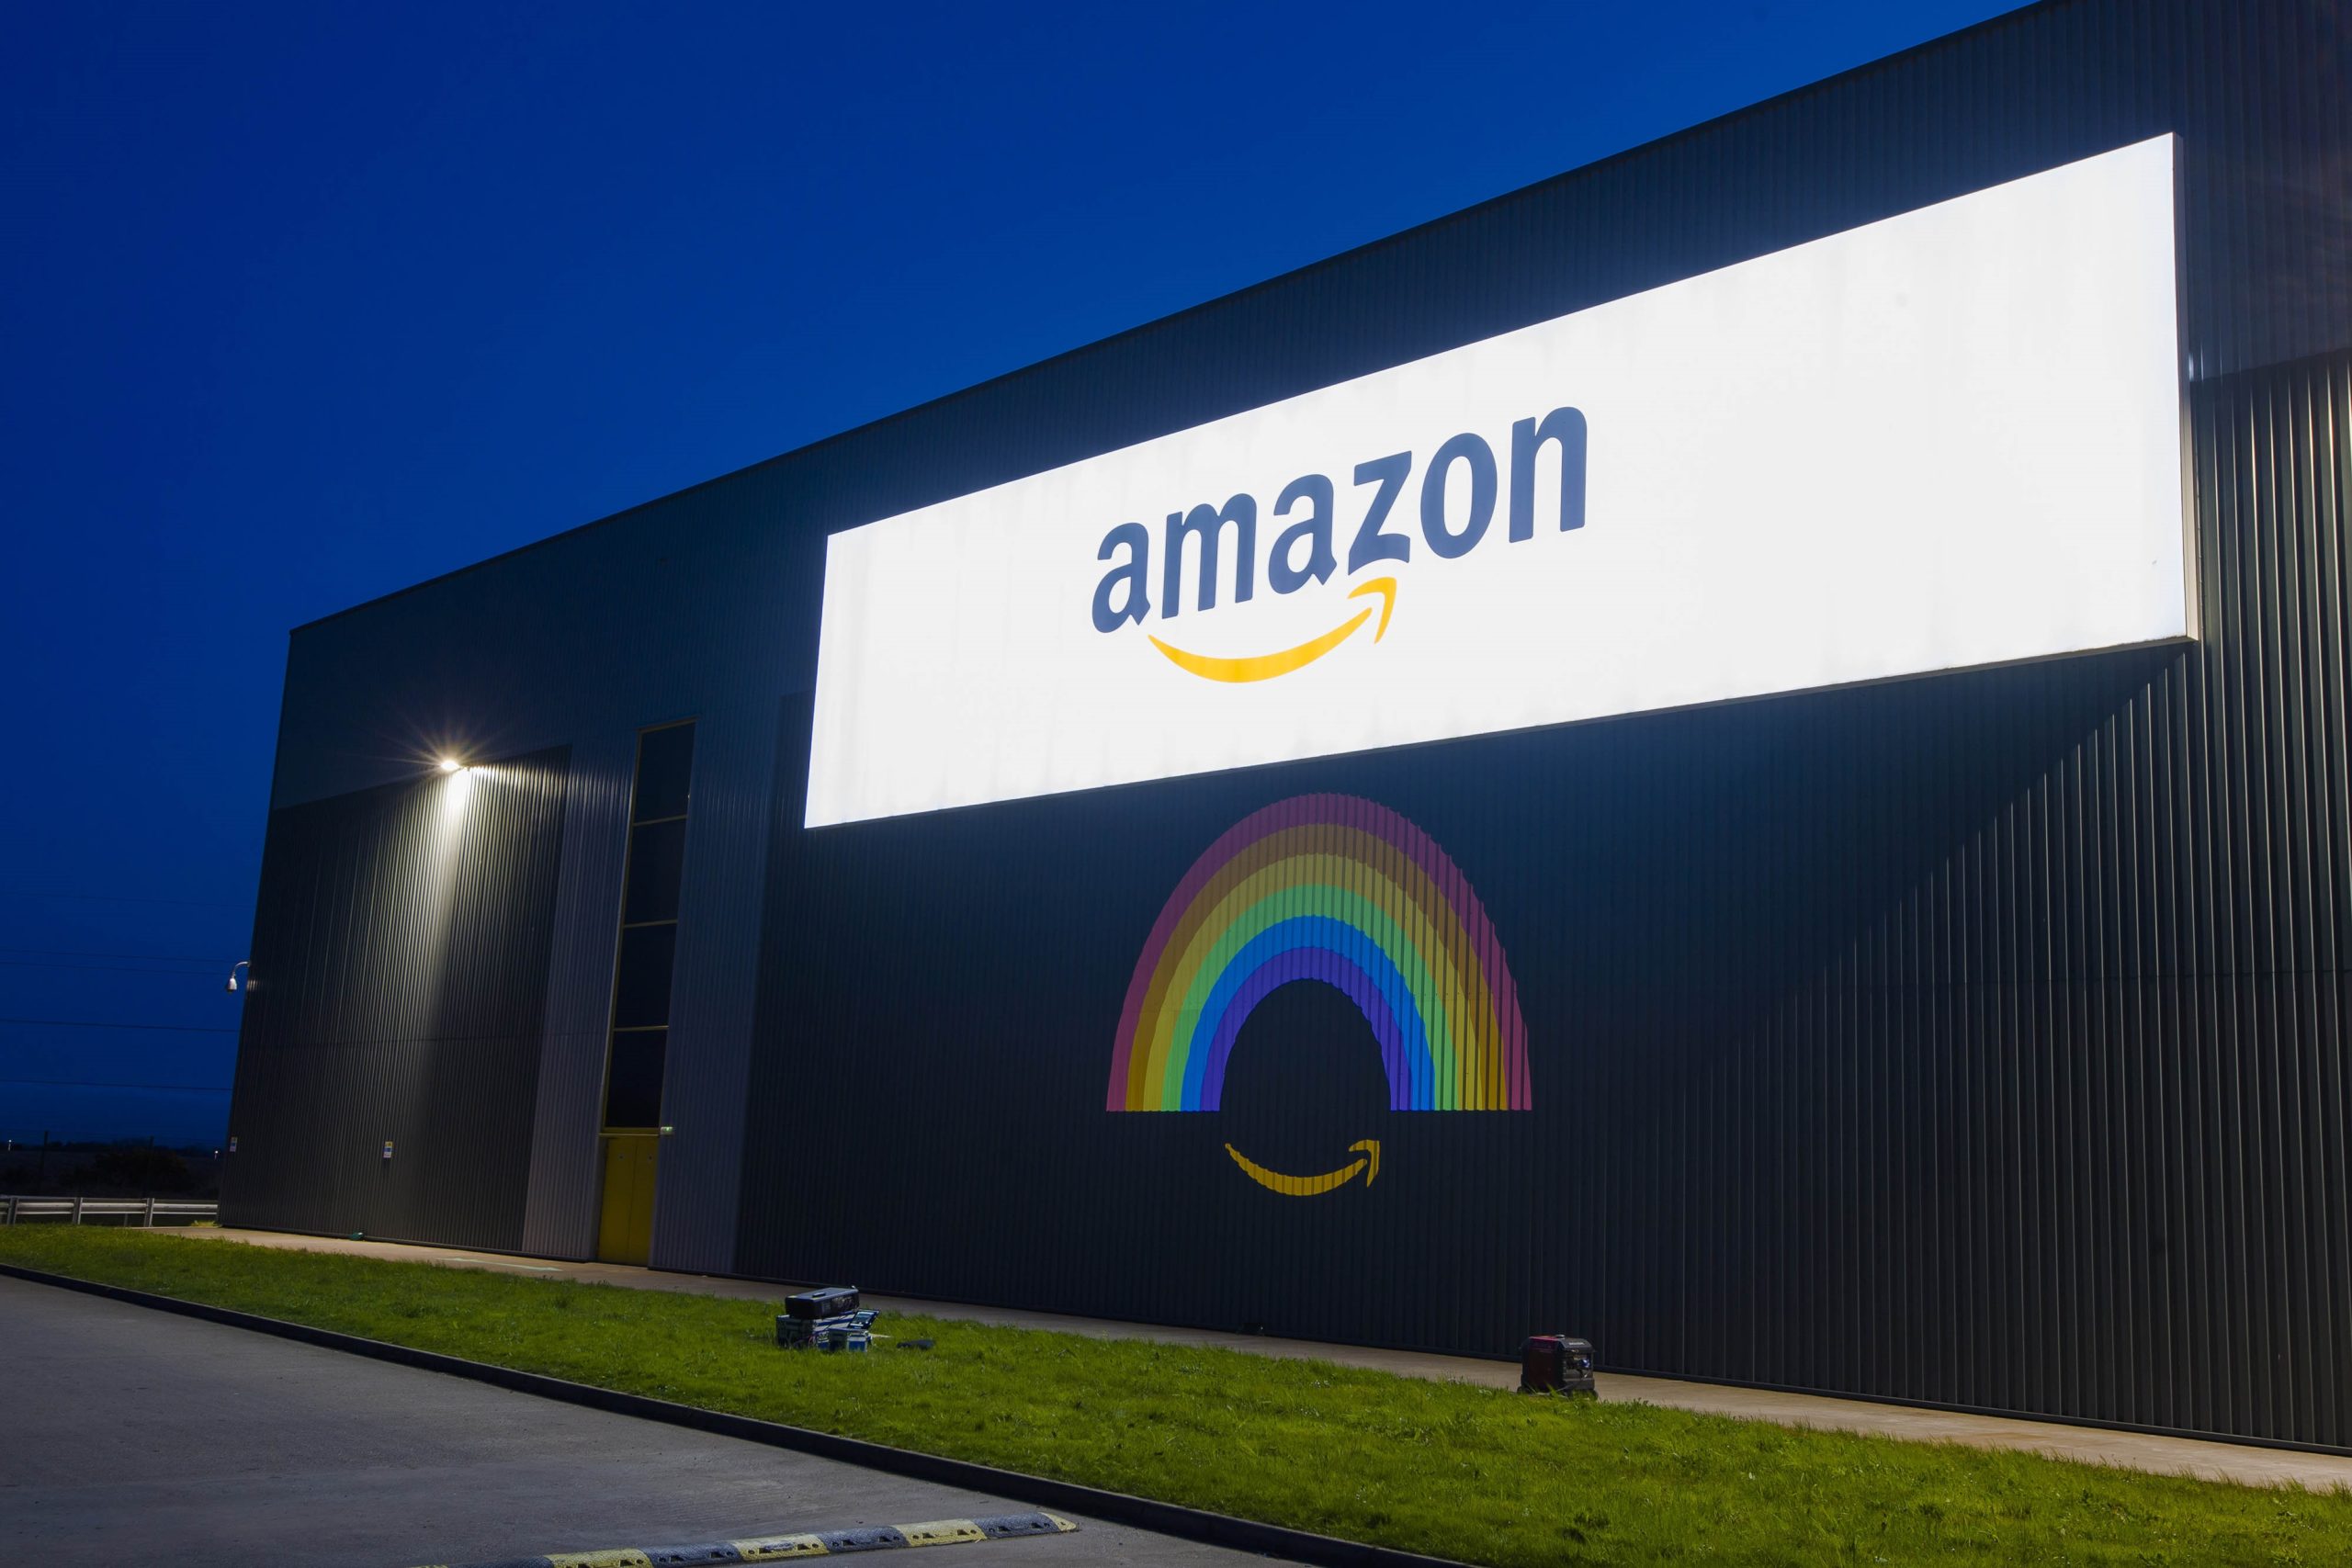 Online retailer Amazon is showing its thanks to the nations’ key workers by lighting up its buildings around the country, including a giant rainbow projection at the Fulfilment Centre in Dunfermline, Scotland.